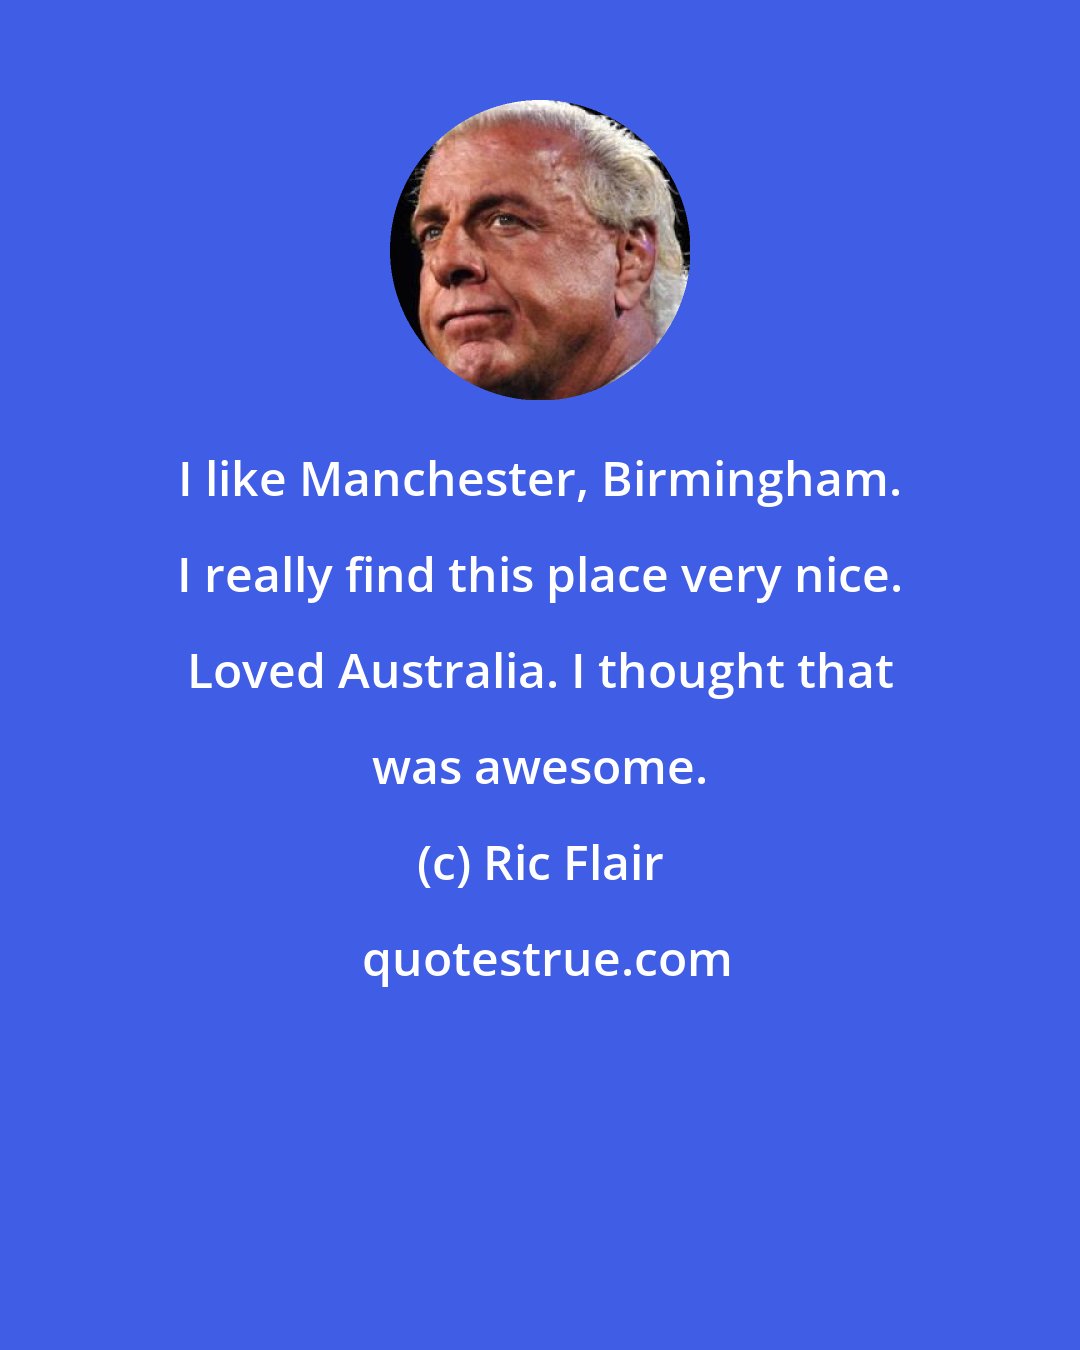 Ric Flair: I like Manchester, Birmingham. I really find this place very nice. Loved Australia. I thought that was awesome.